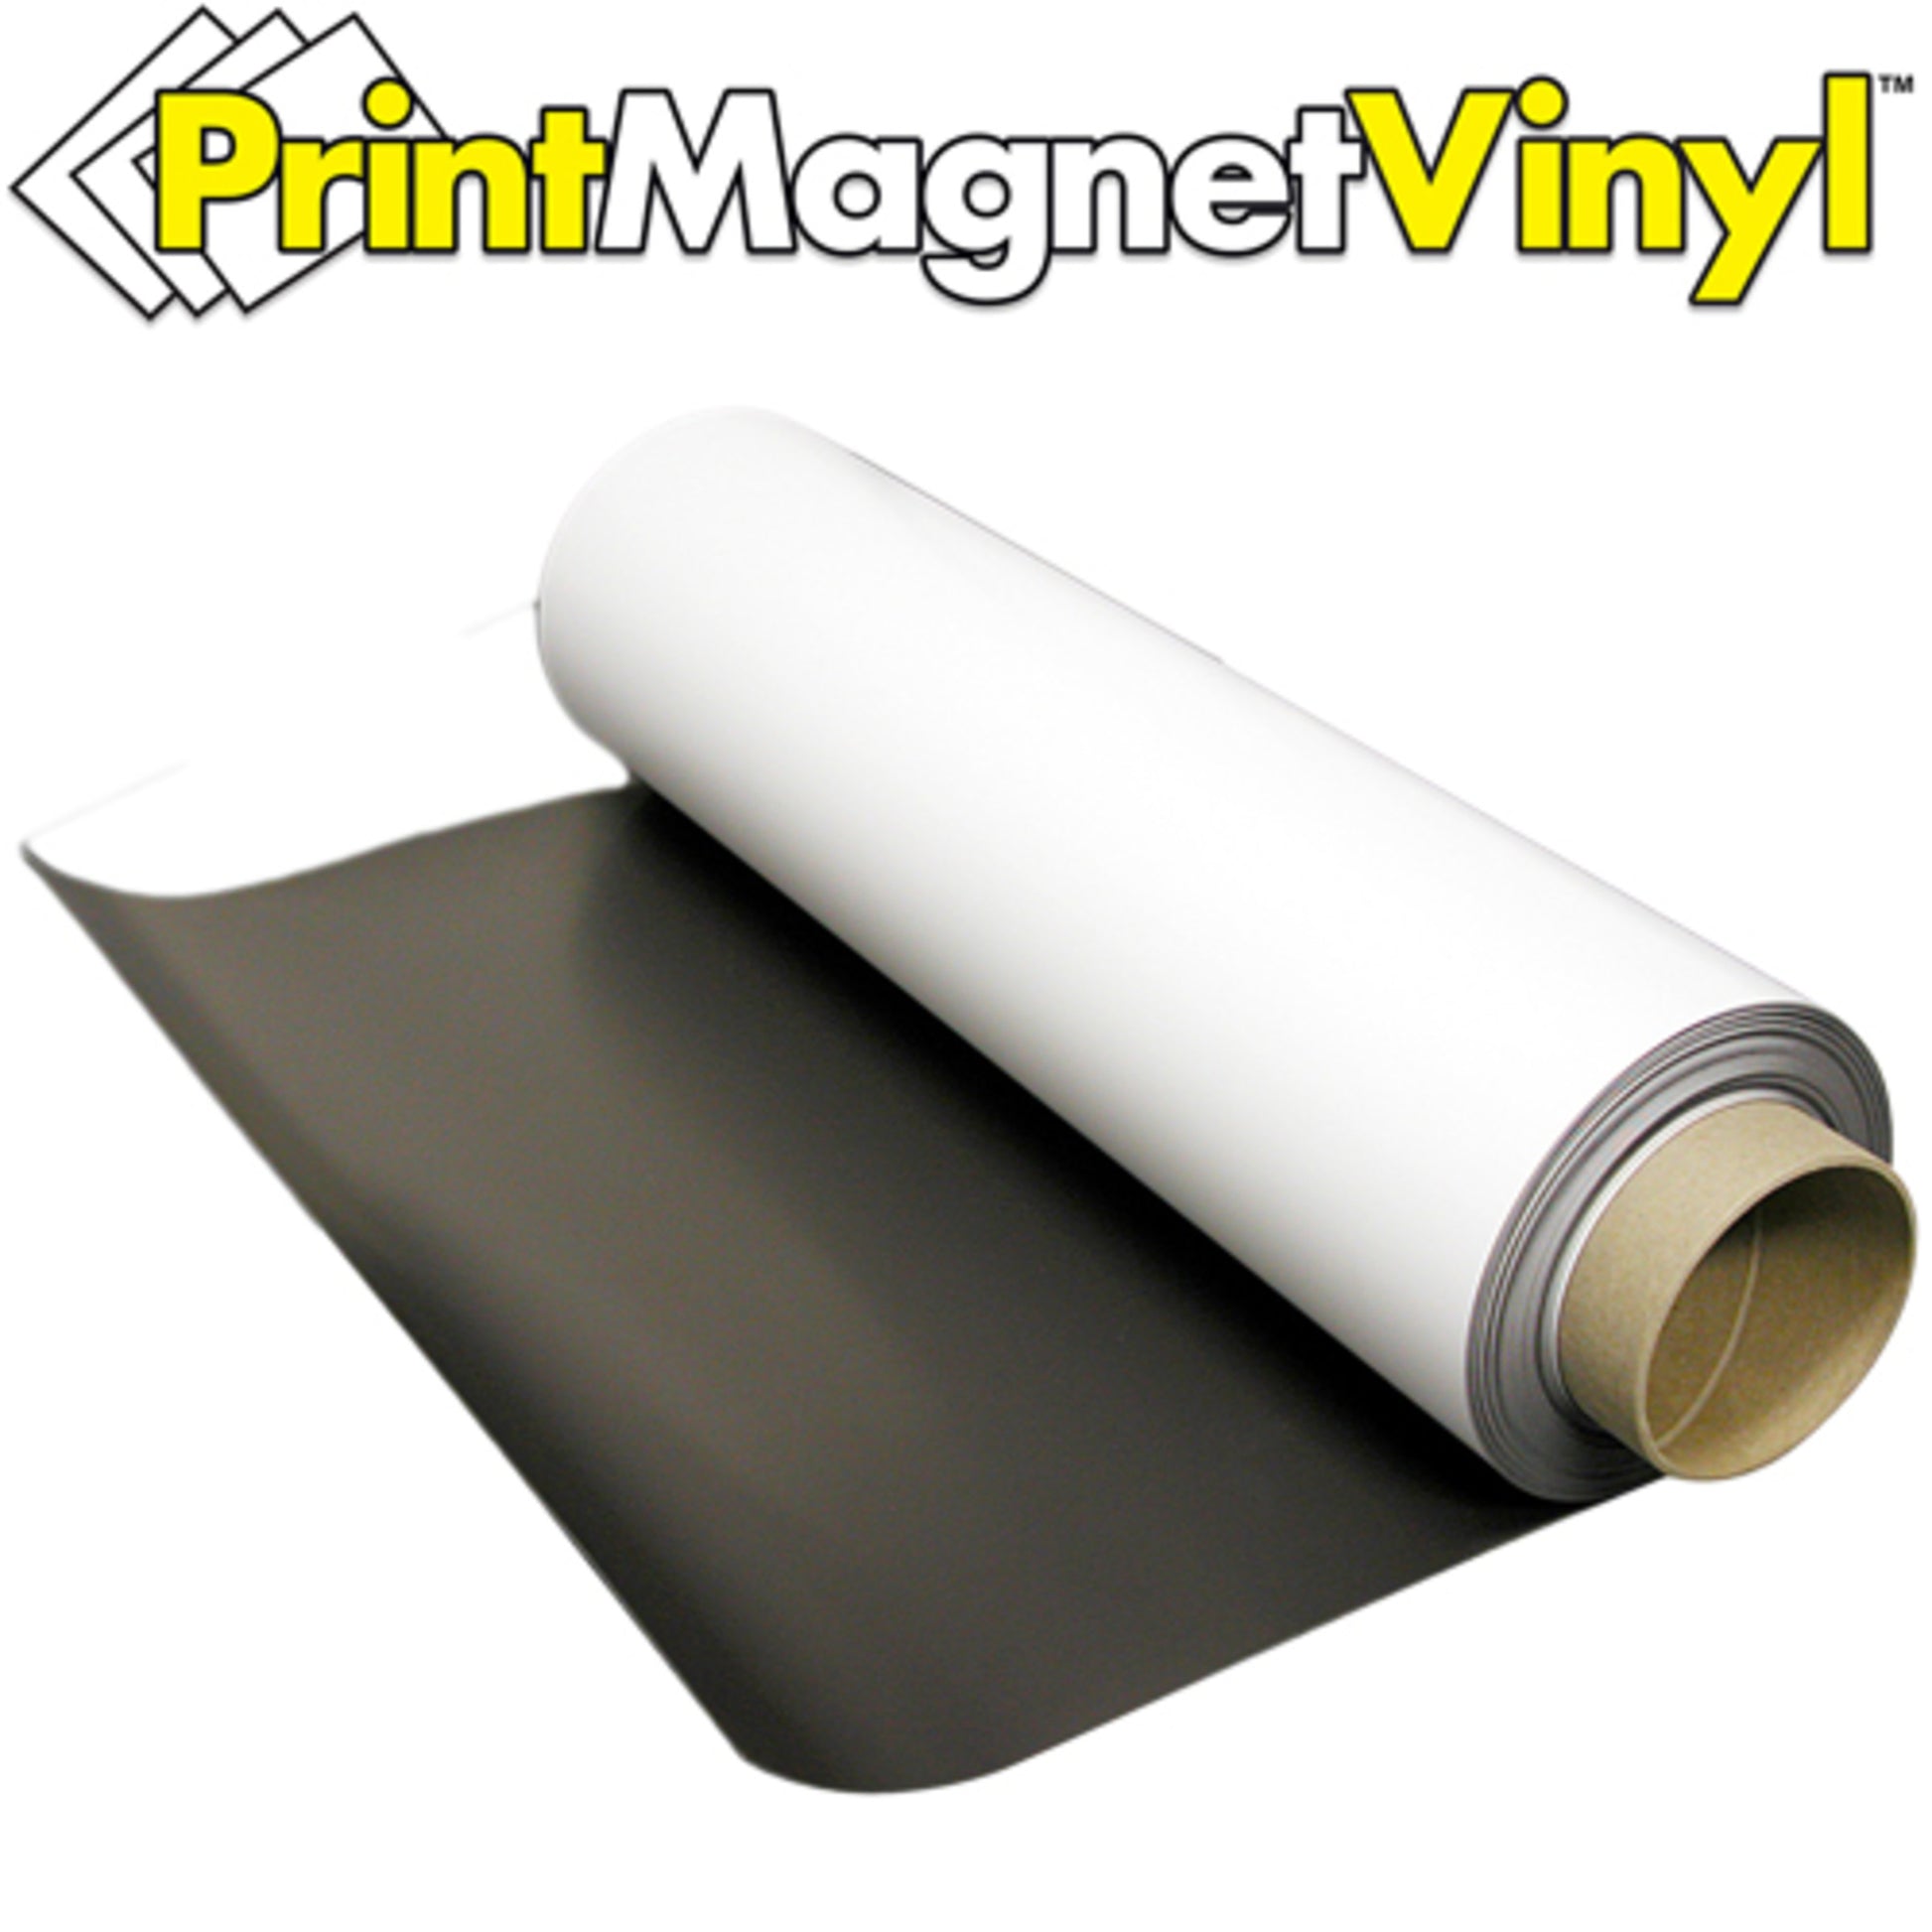 Load image into Gallery viewer, ZGN3024GW25 PrintMagnetVinyl™ Flexible Magnetic Sheet - In Use